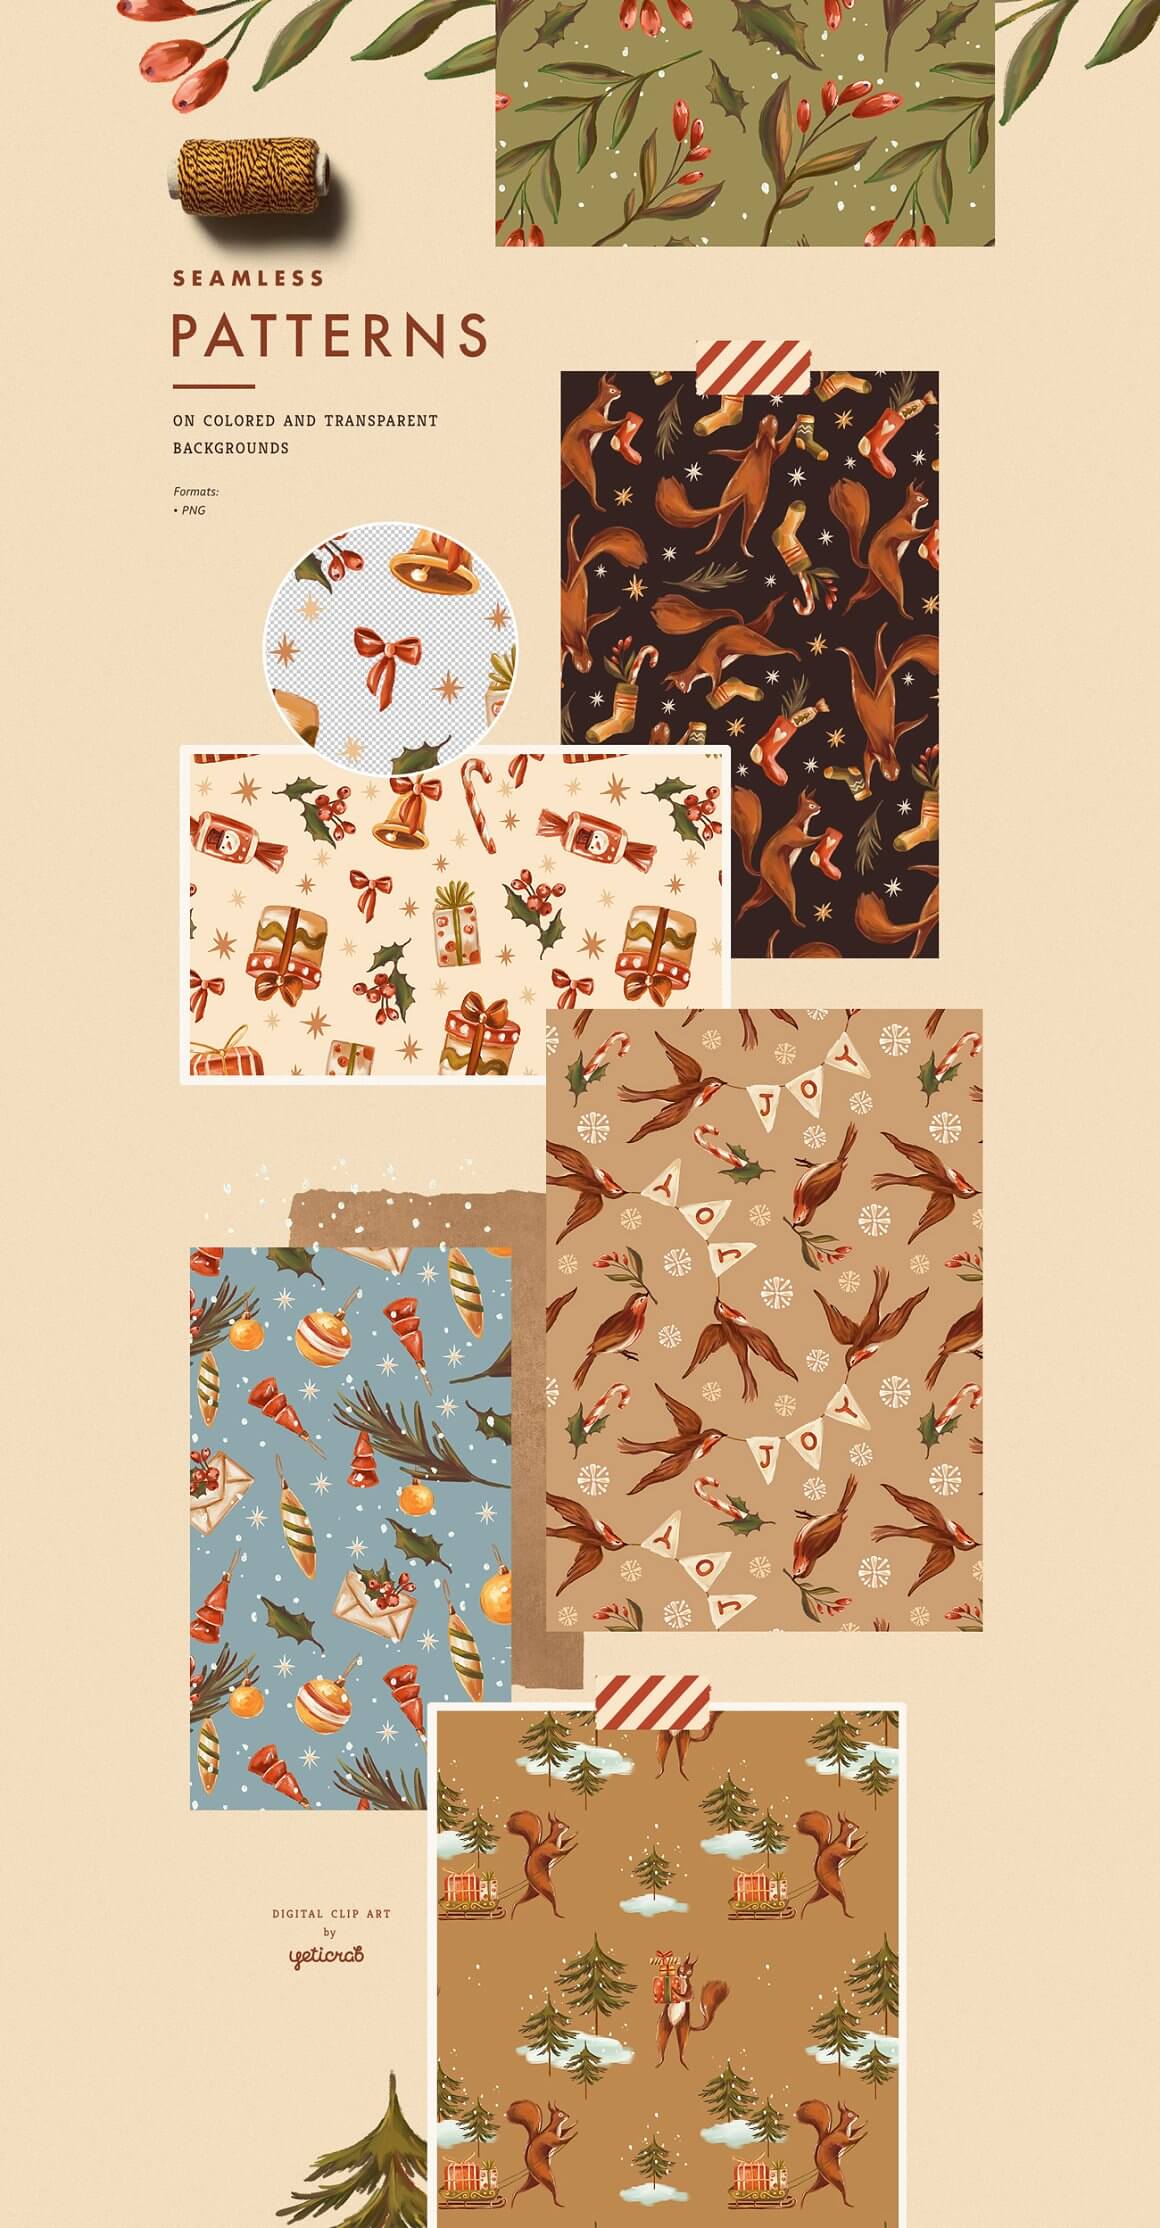 Seamless Christmas Patterns on Colored and Transparent Backgrounds.